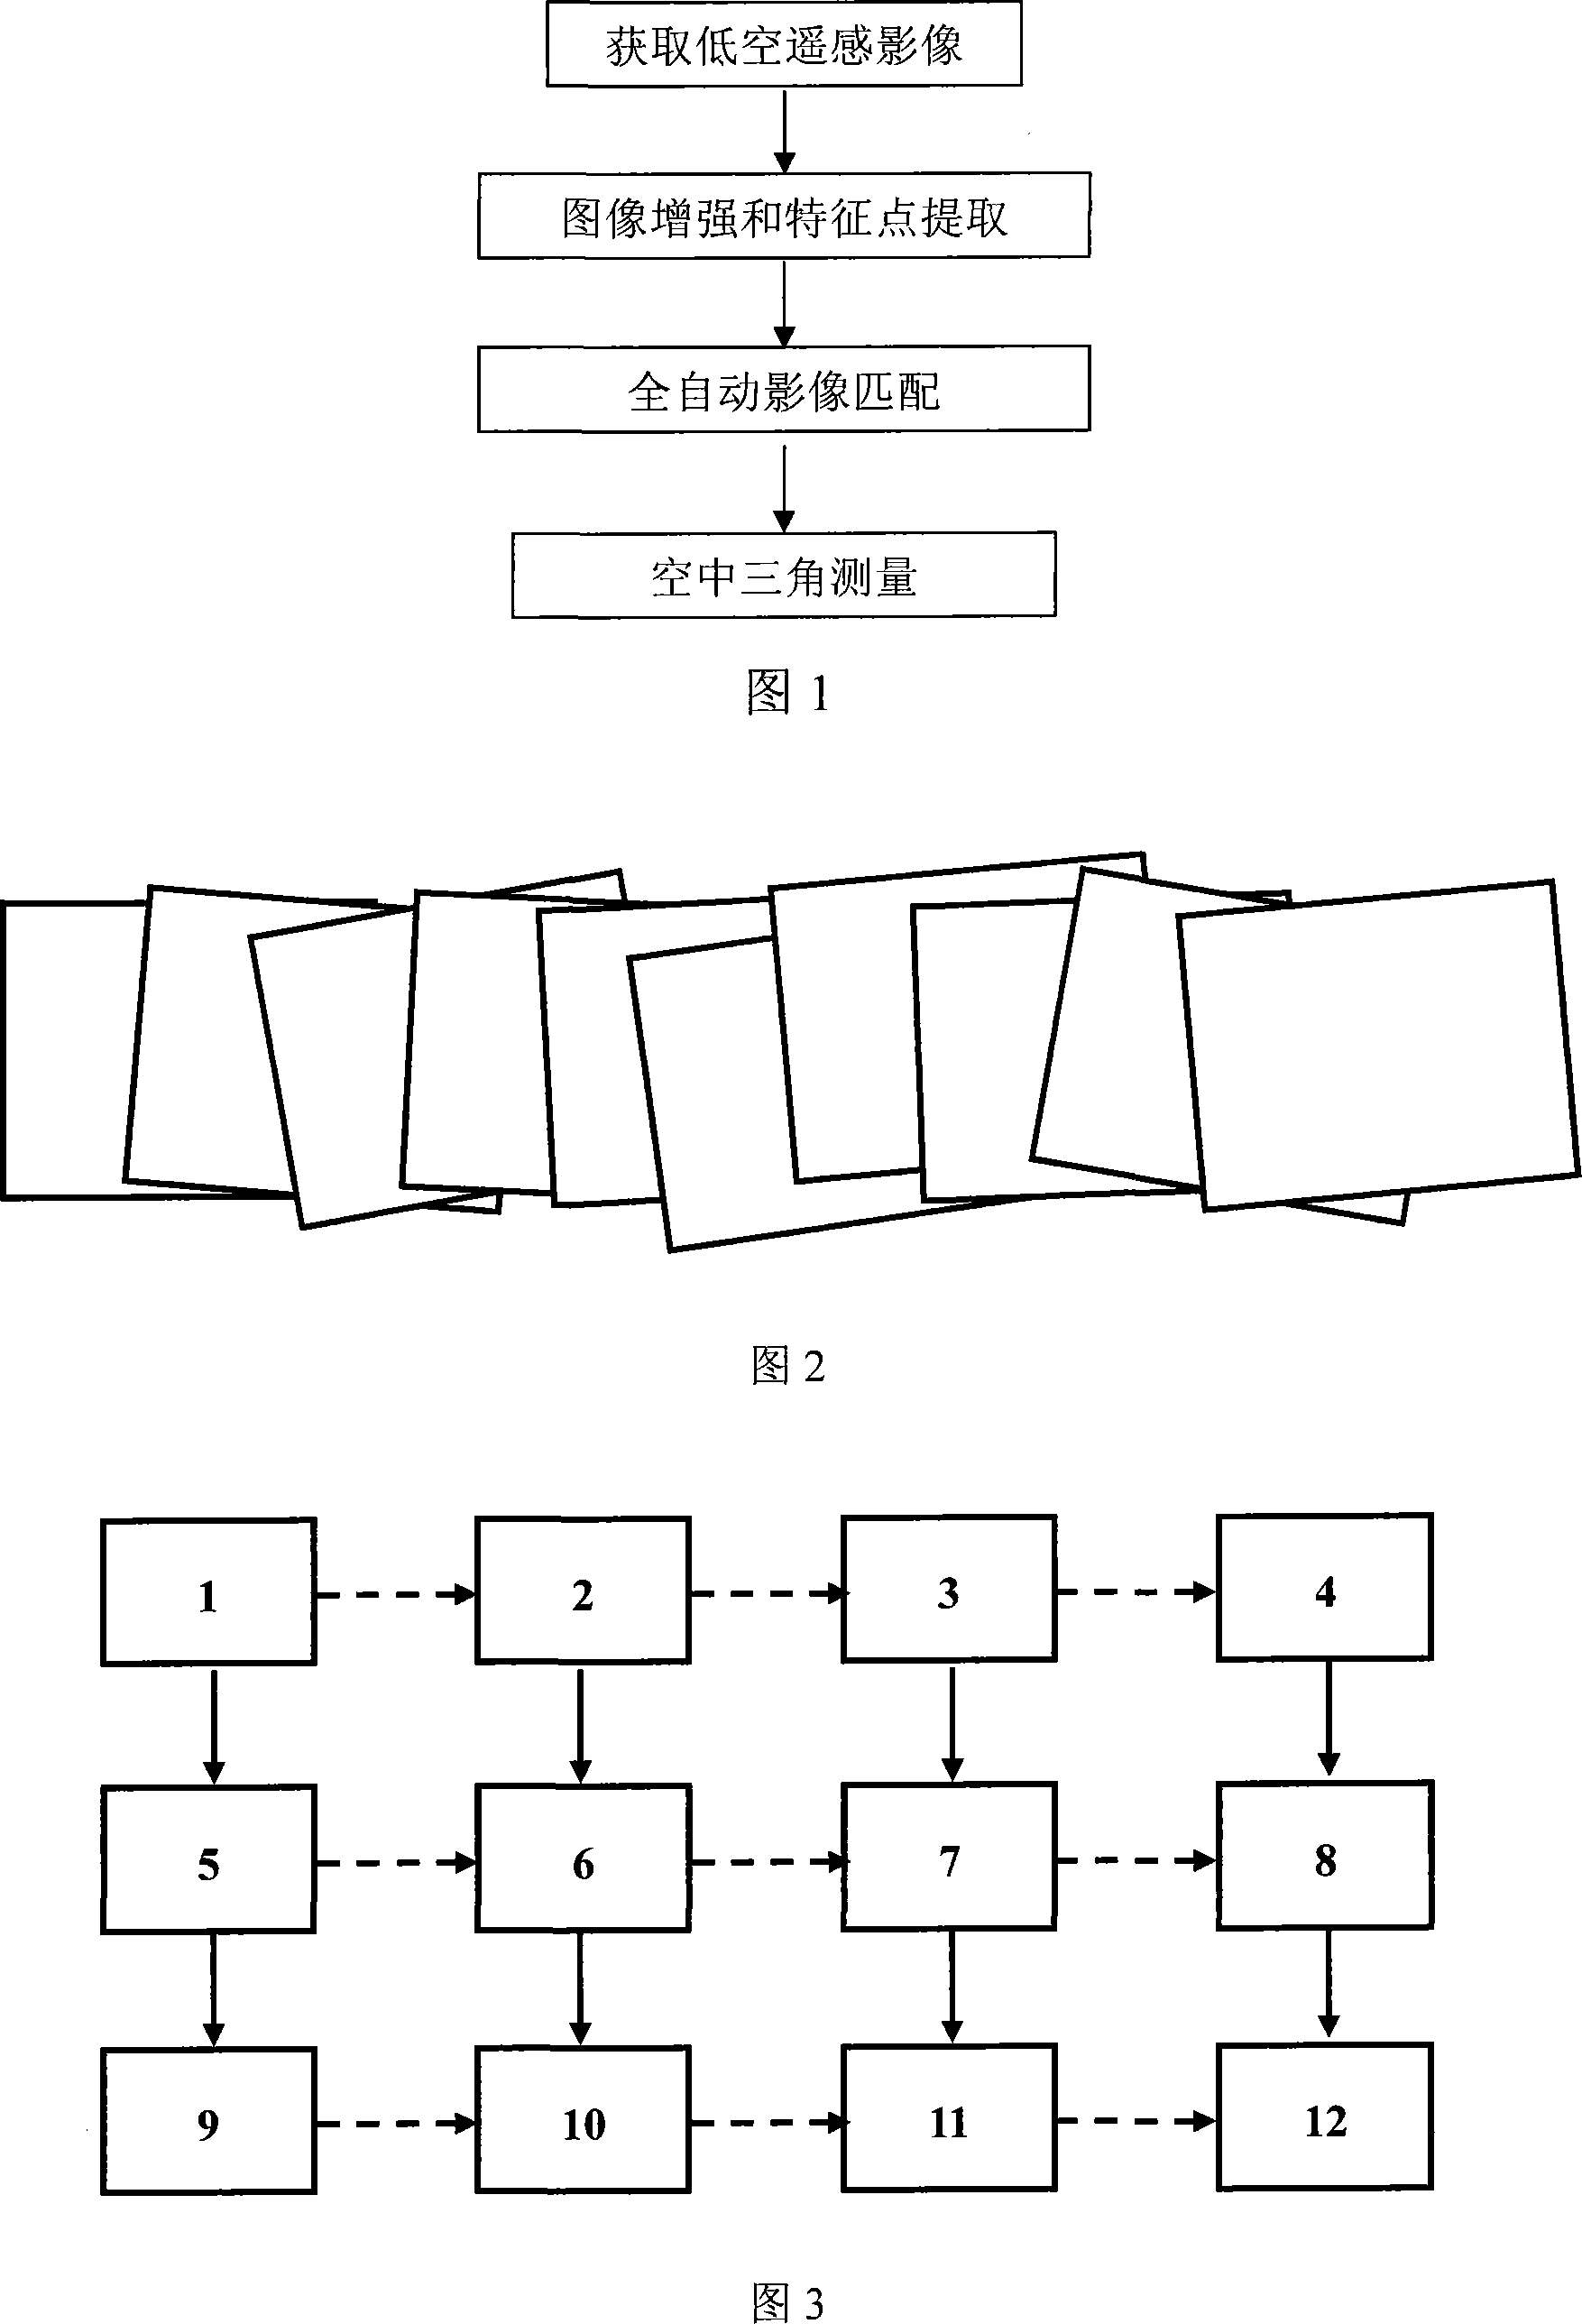 Quick low altitude remote sensing image automatic matching and airborne triangulation method